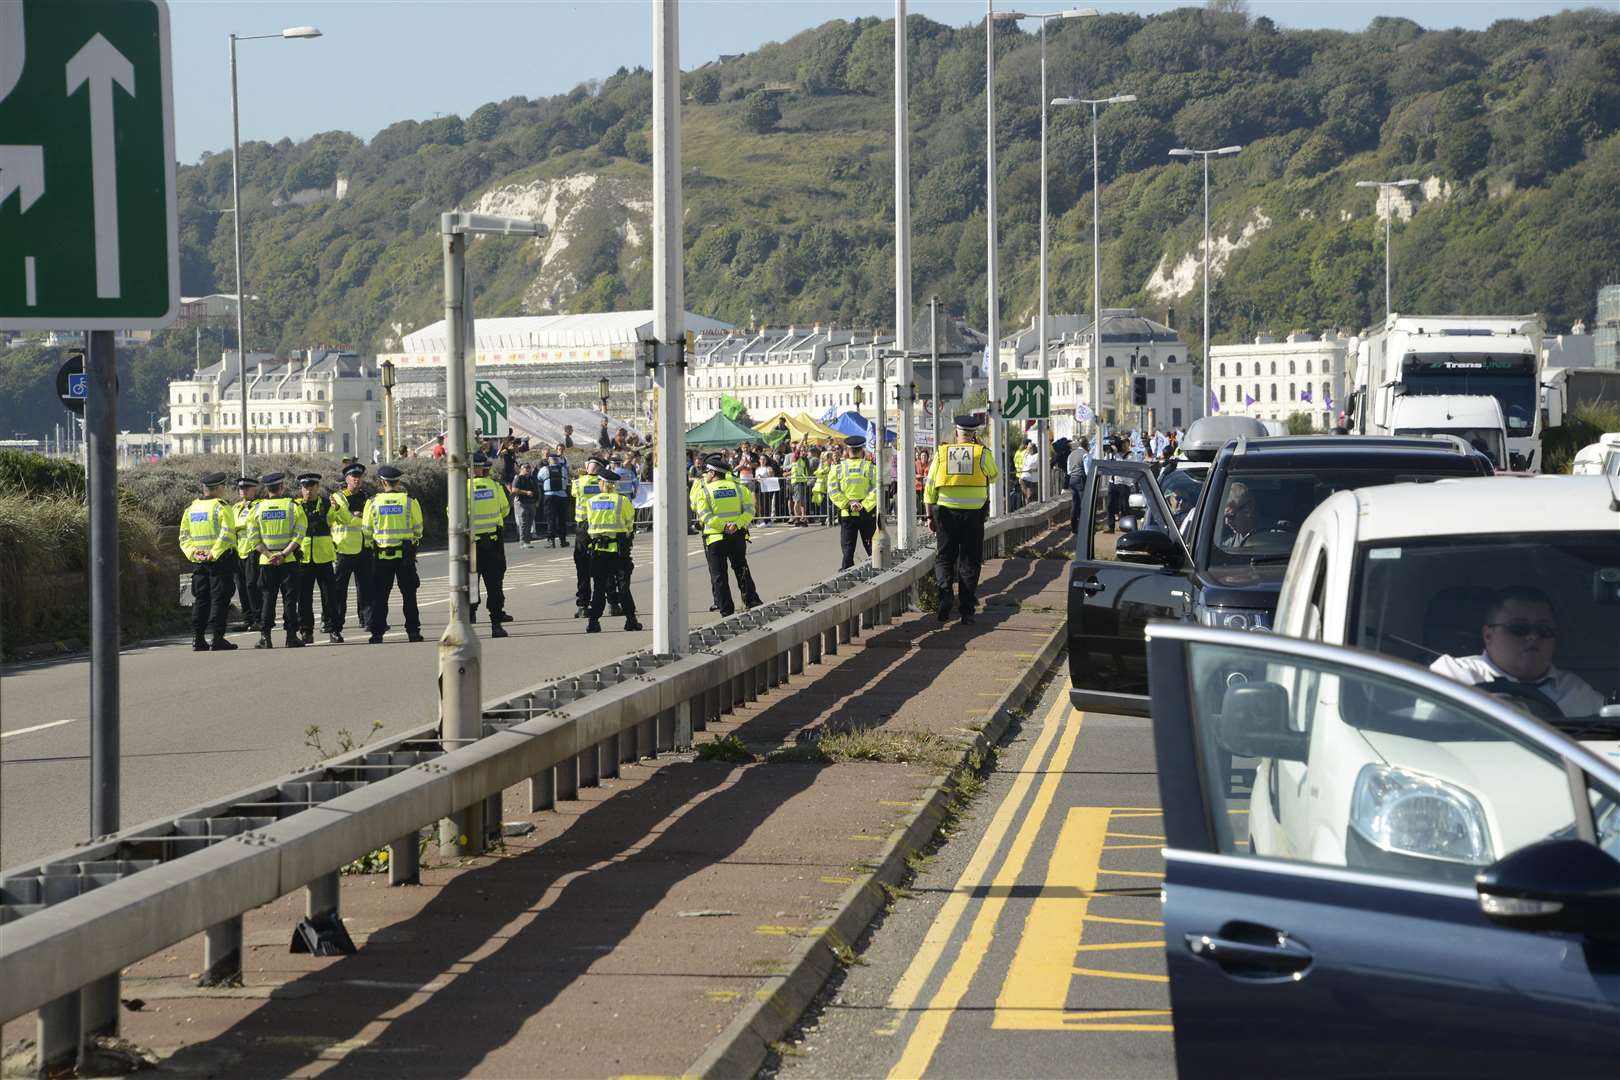 Dover's Townwall Street pictured in September 2019 during an Extinction Rebellion protest Picture: Paul Amos